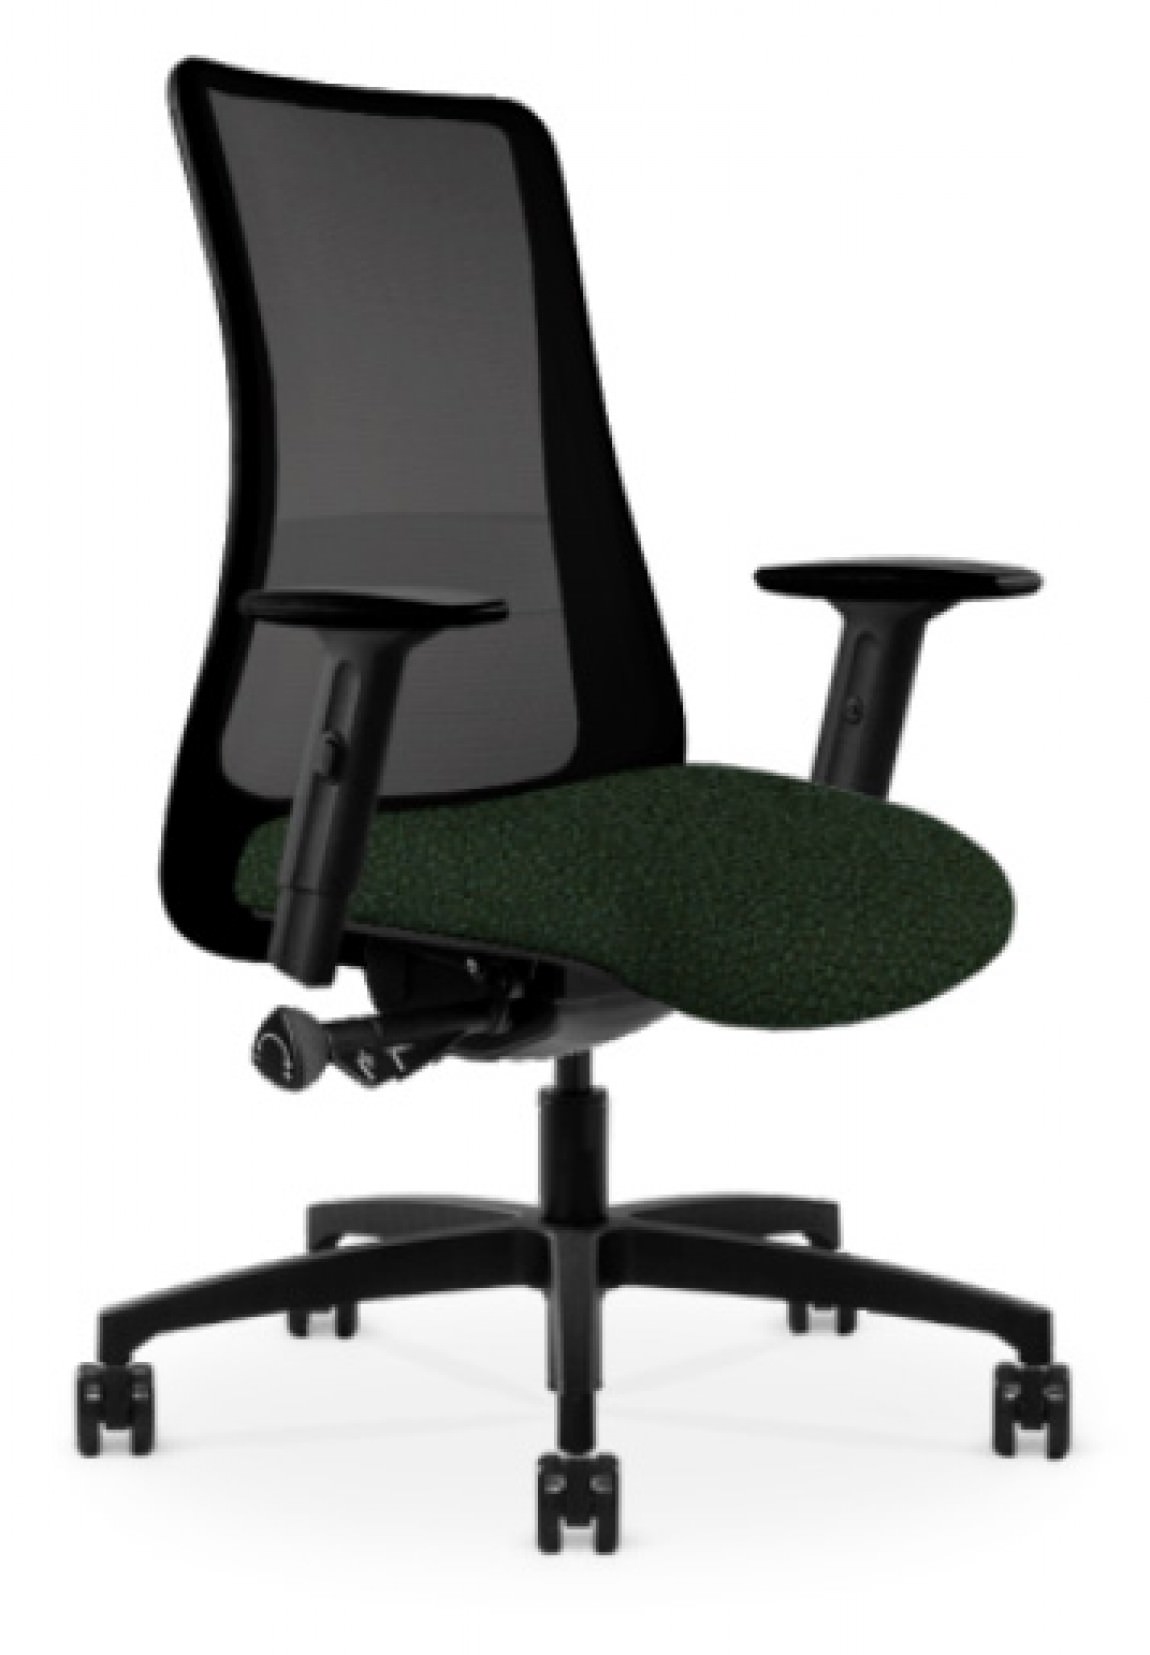 Black Copper Mesh Antimicrobial Office Chair w/ Dark Green Seat